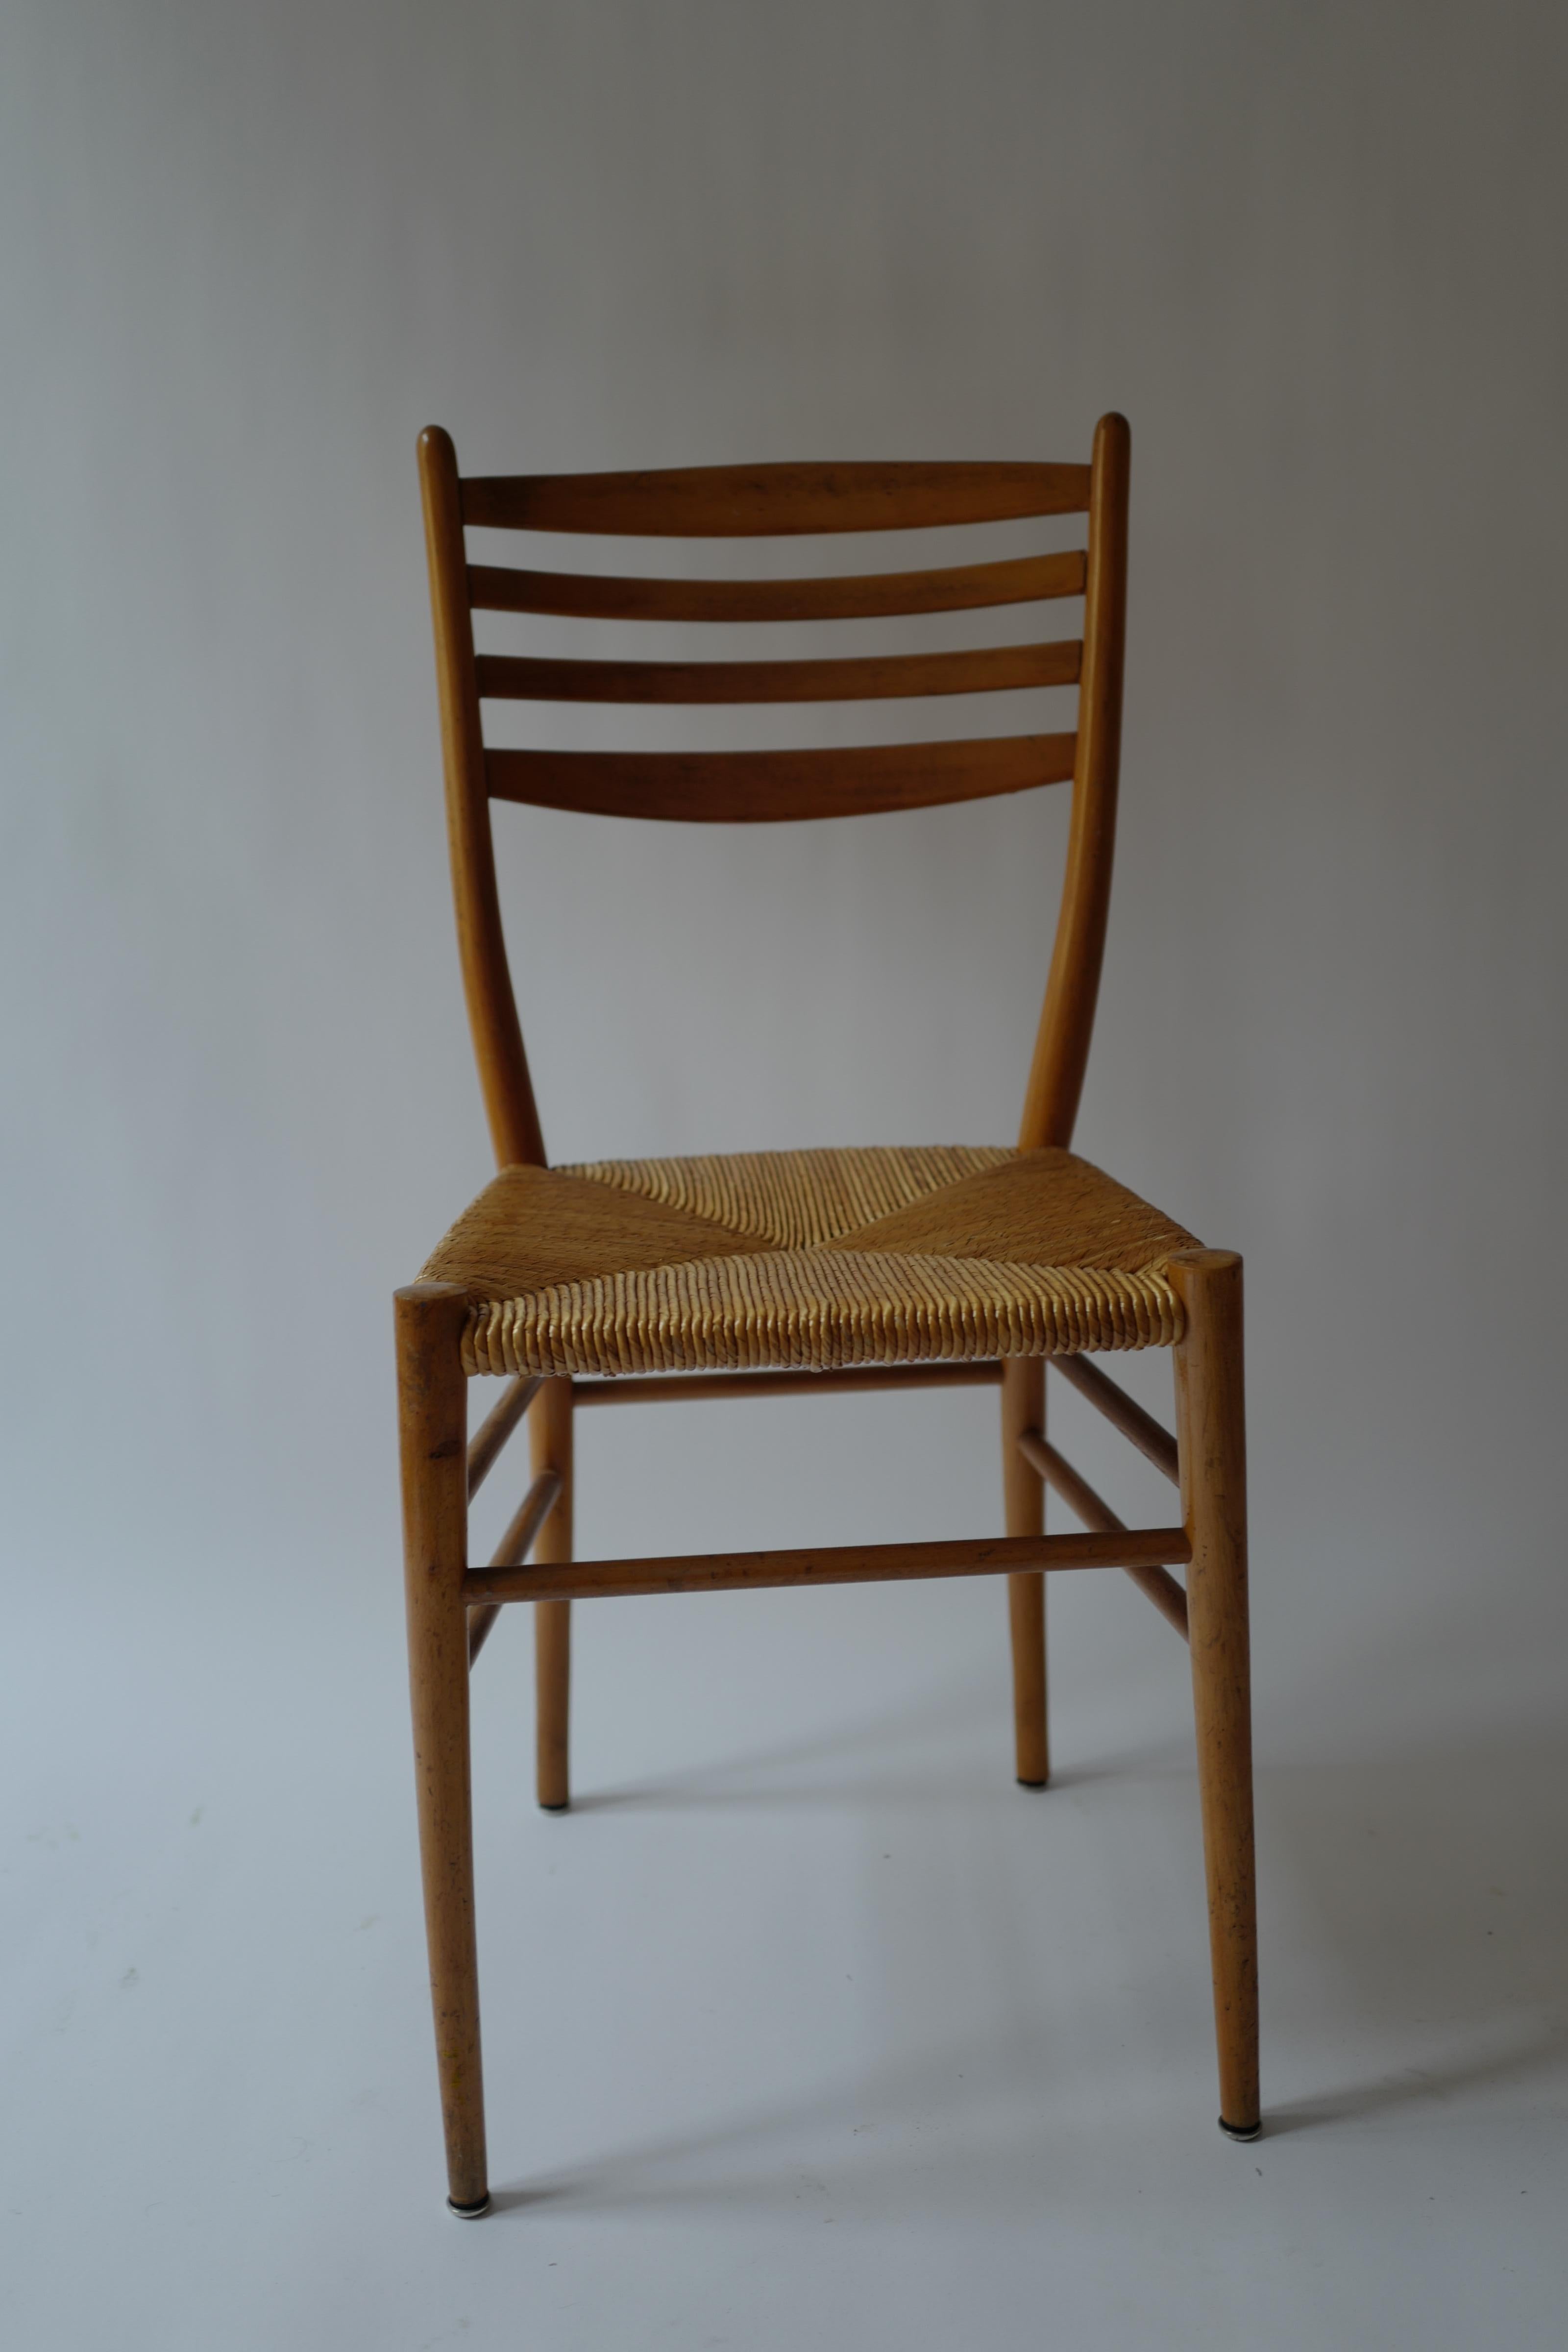 French Provincial Woven Wicker and Wood Gio Ponti Style Chair 1950's For Sale